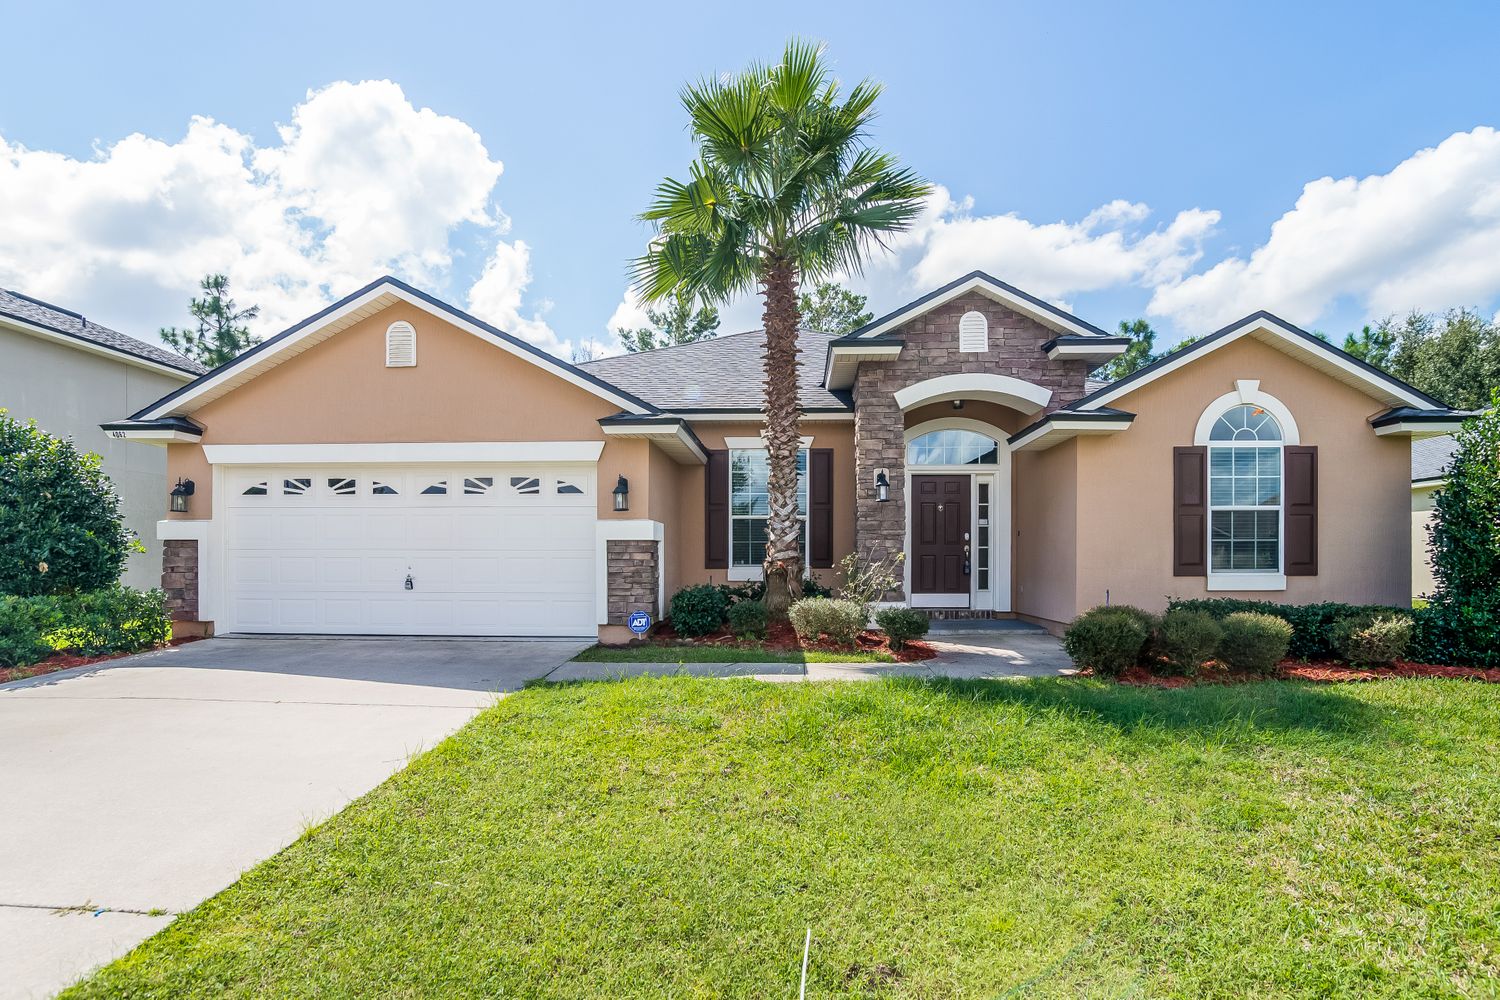 Beautiful home with a two-car garage at Invitation Homes Jacksonville.